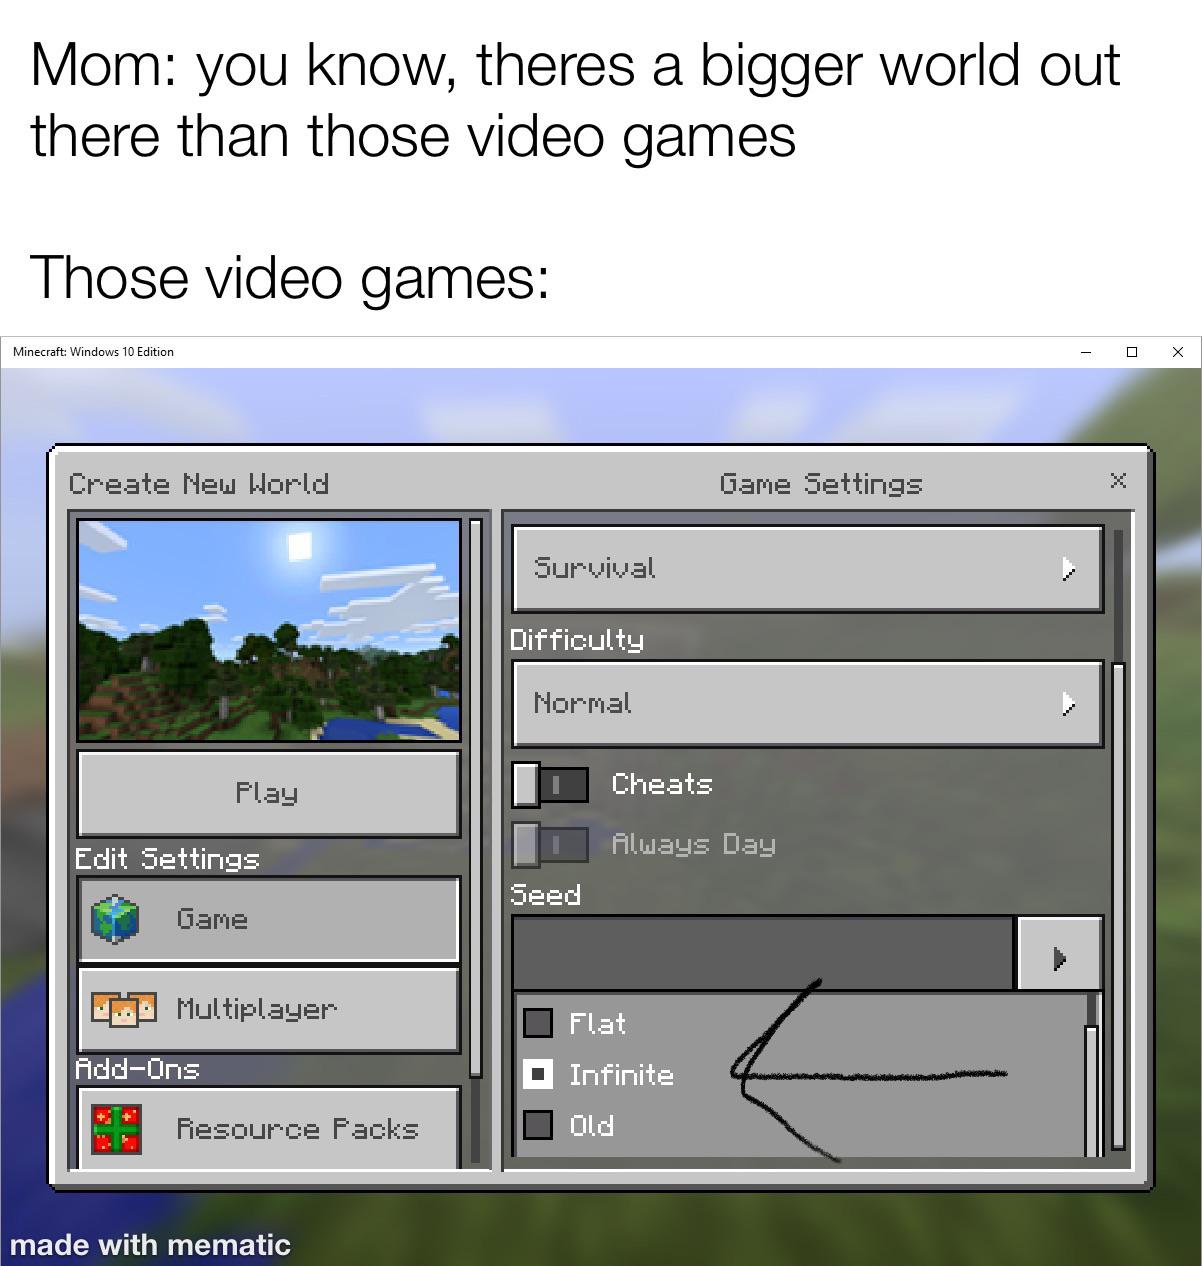 funny memes - screenshot - Mom you know, theres a bigger world out there than those video games Those video games Minecraft Windows 10 Edition Create New World Game Settings Survival Difficulty Normal Play Cheats Edit Settings Always Day Seed Game Multipl